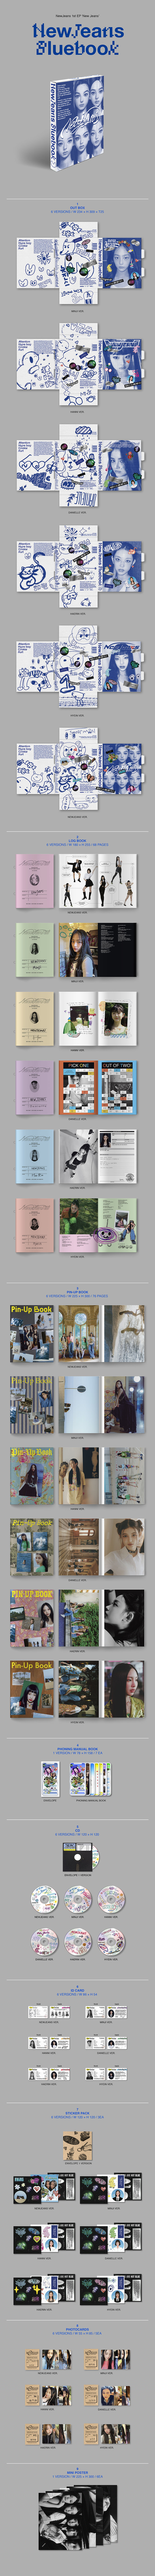 NewJeans - 1st EP [New Jeans] (Bluebook ver.) (6 versions Set) kpop kpopgirl NewJeans Bluebook NewJeansalbum girlgloup NewJeans1st